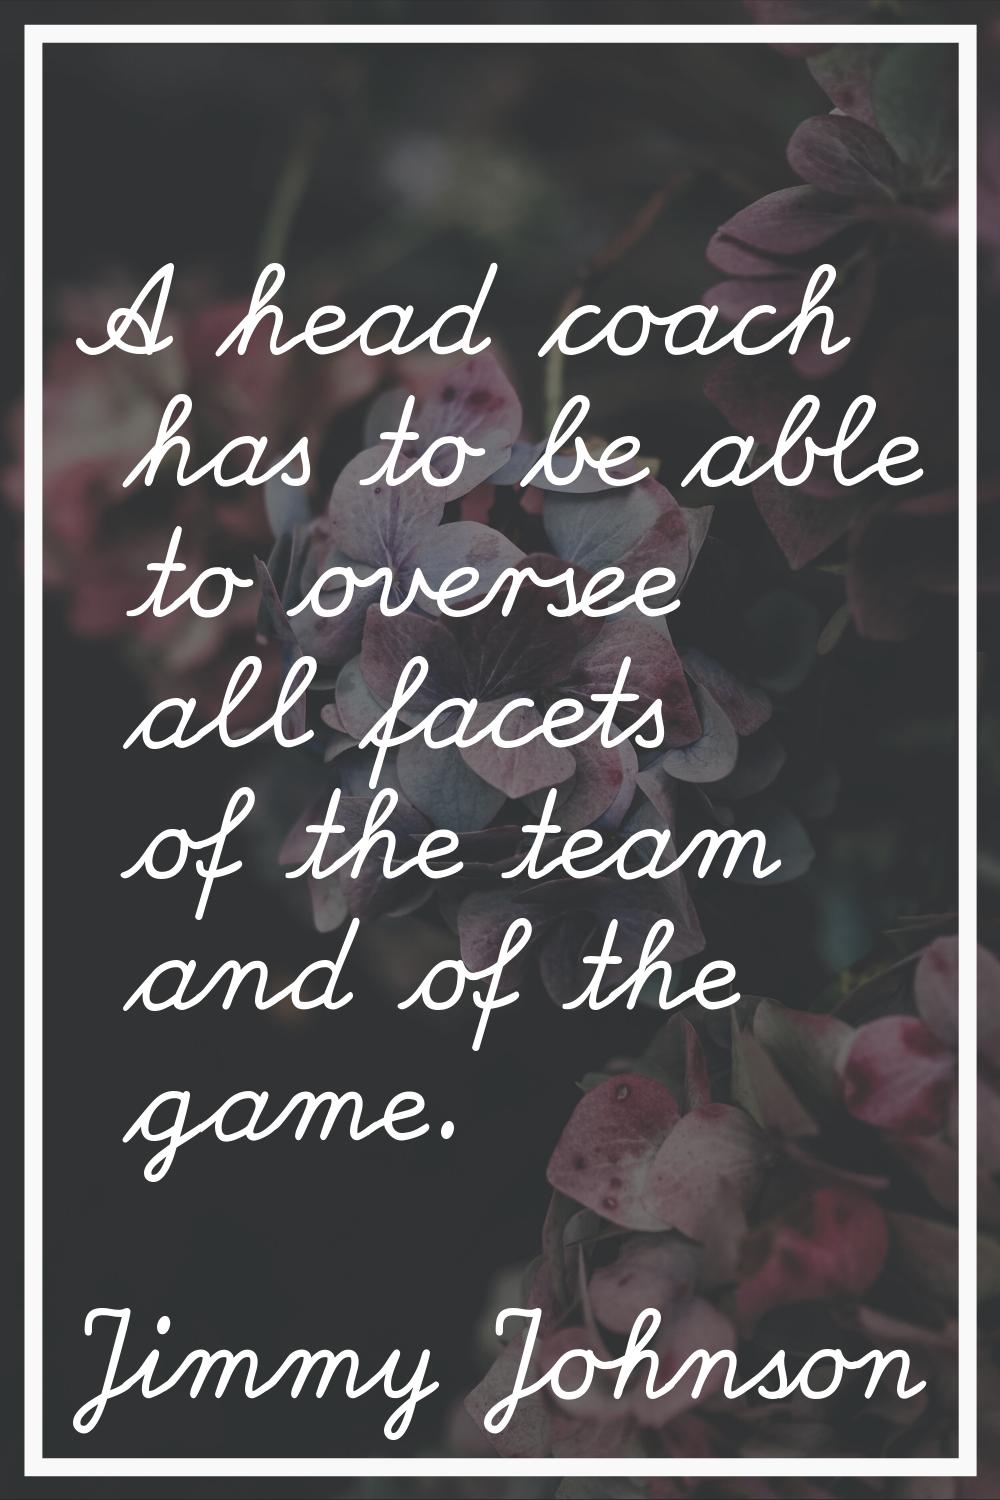 A head coach has to be able to oversee all facets of the team and of the game.